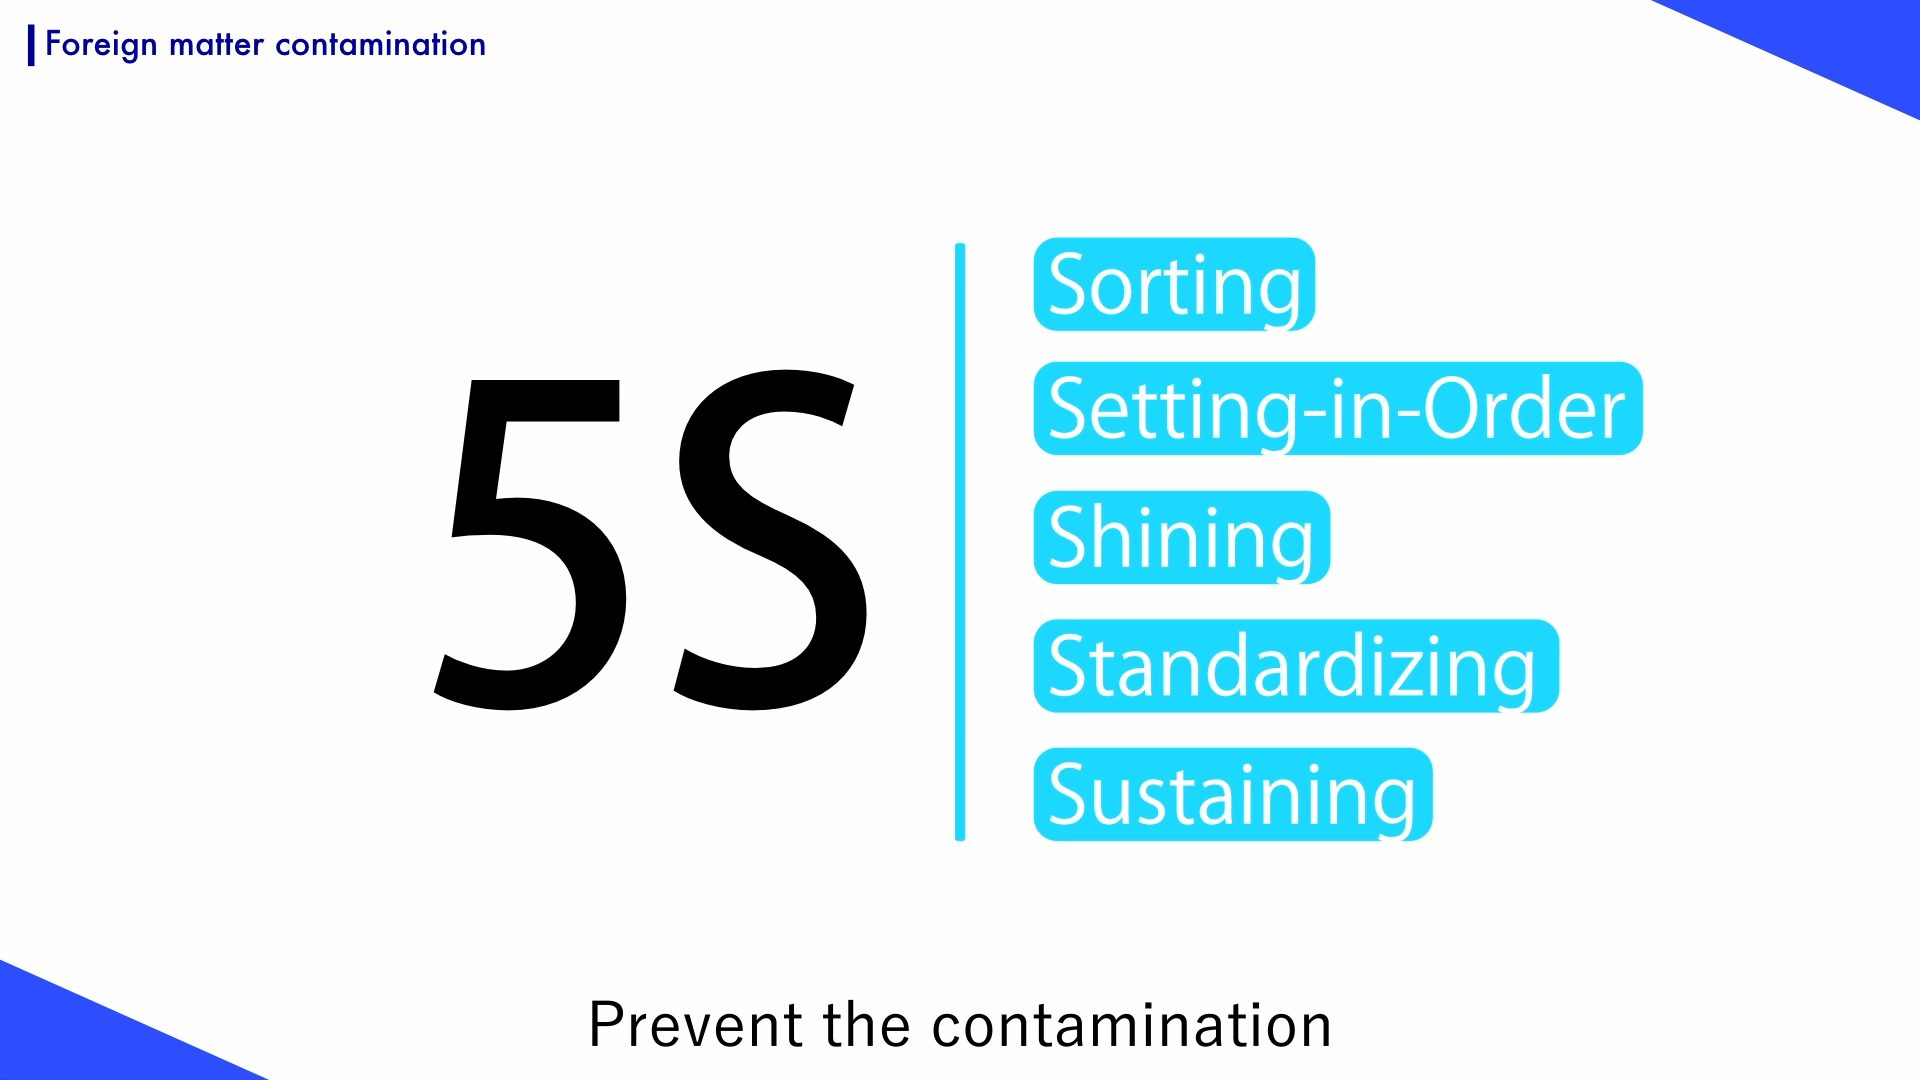 Prevent contamination of foreign matter by 5S